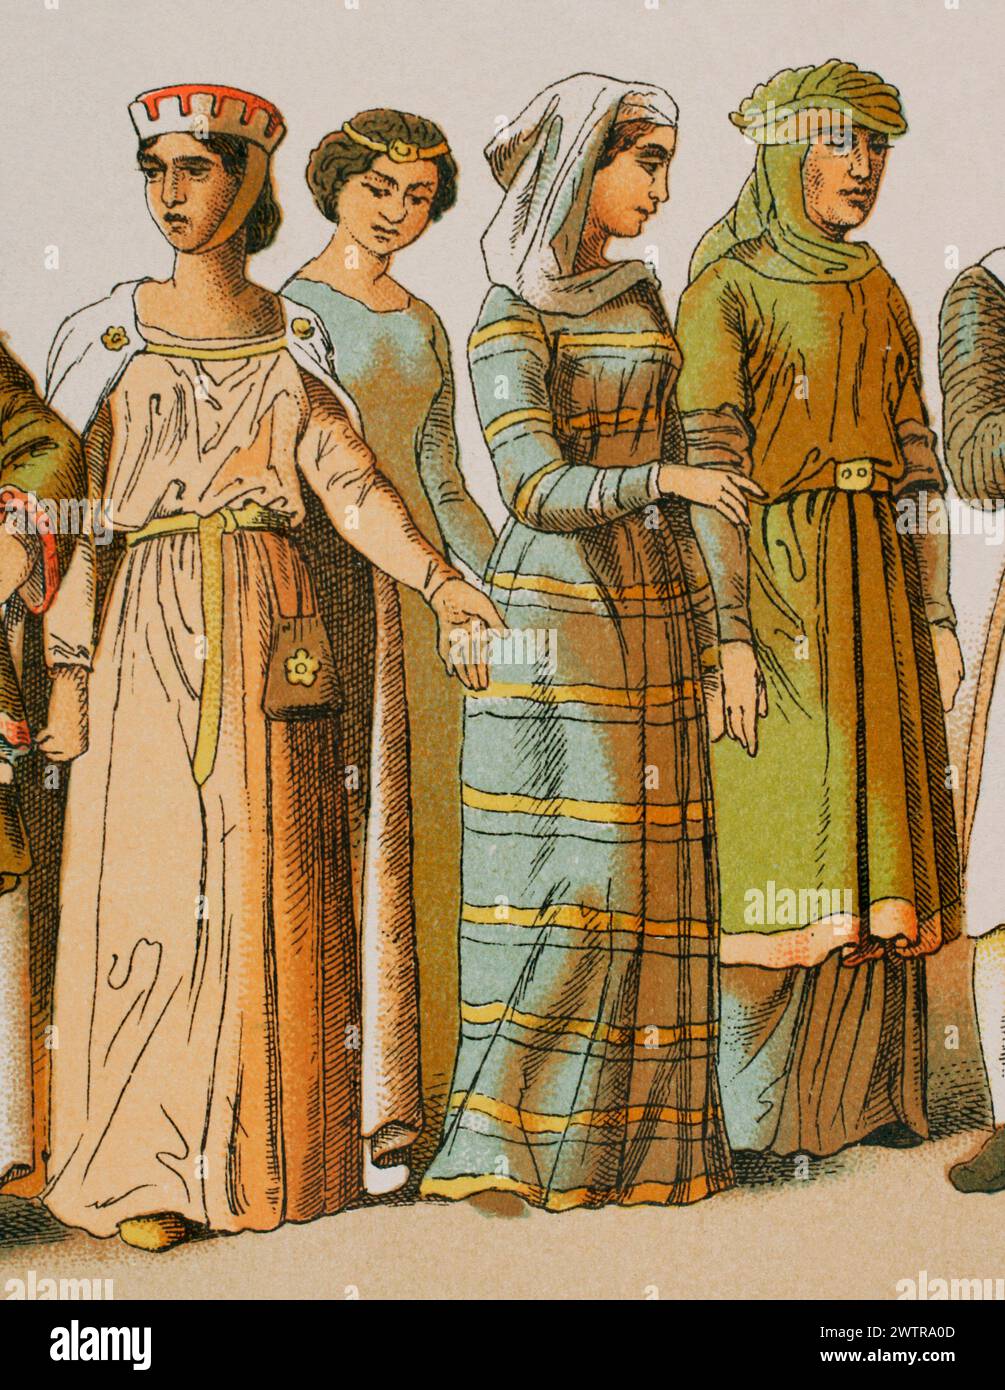 History of France, 1100. Noble ladies. Chromolithography. 'Historia Universal', by César Cantú. Volume V, 1884. Stock Photo